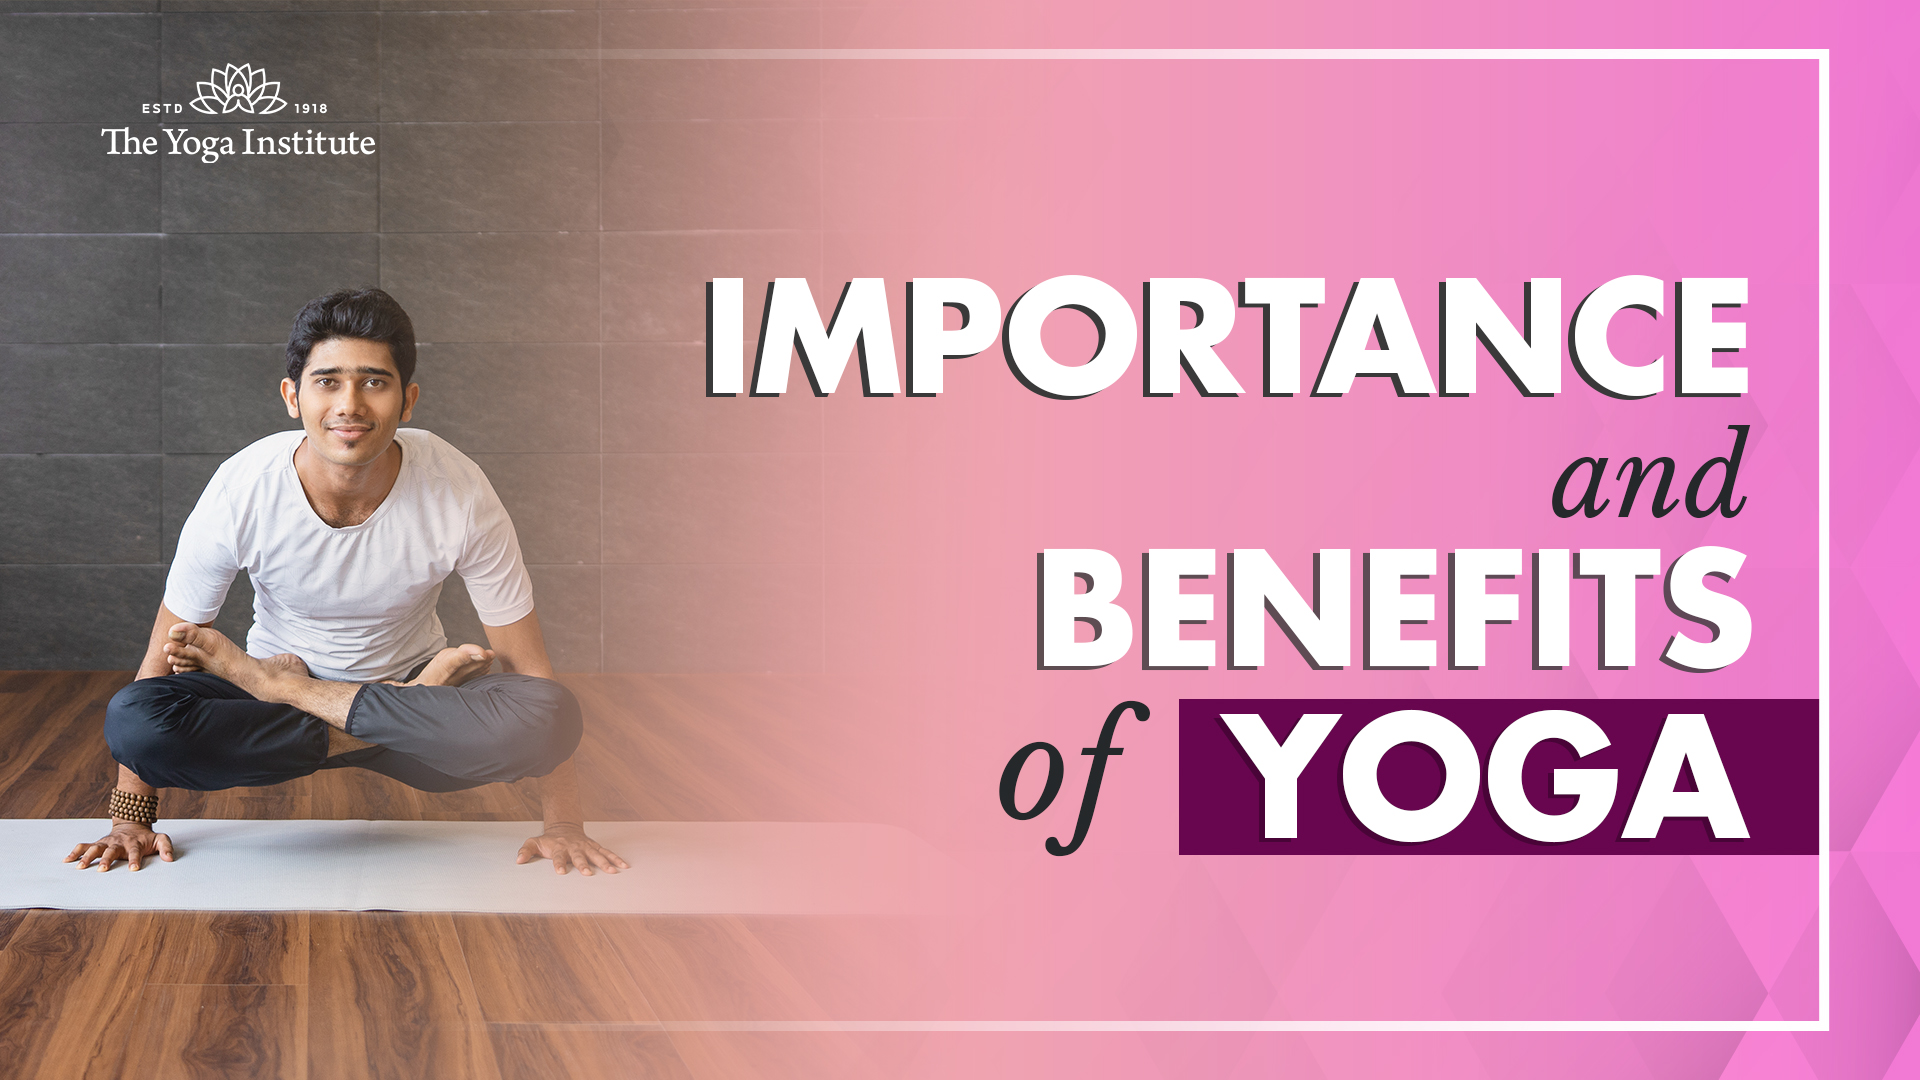 The benefits of yoga and meditation